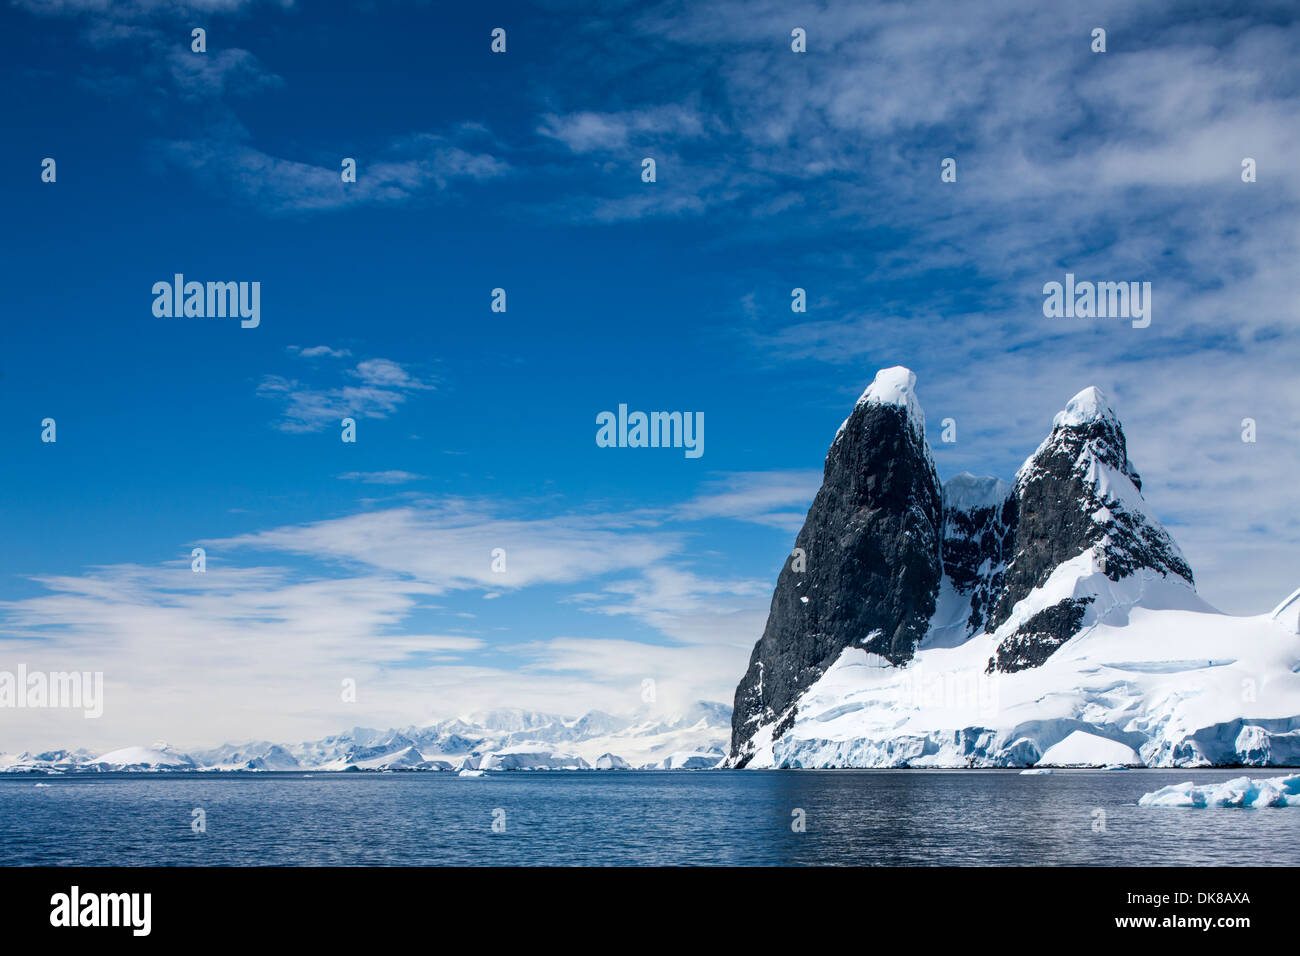 Antarctica, Mountain peaks rise above Cape Renard at entrance to ...